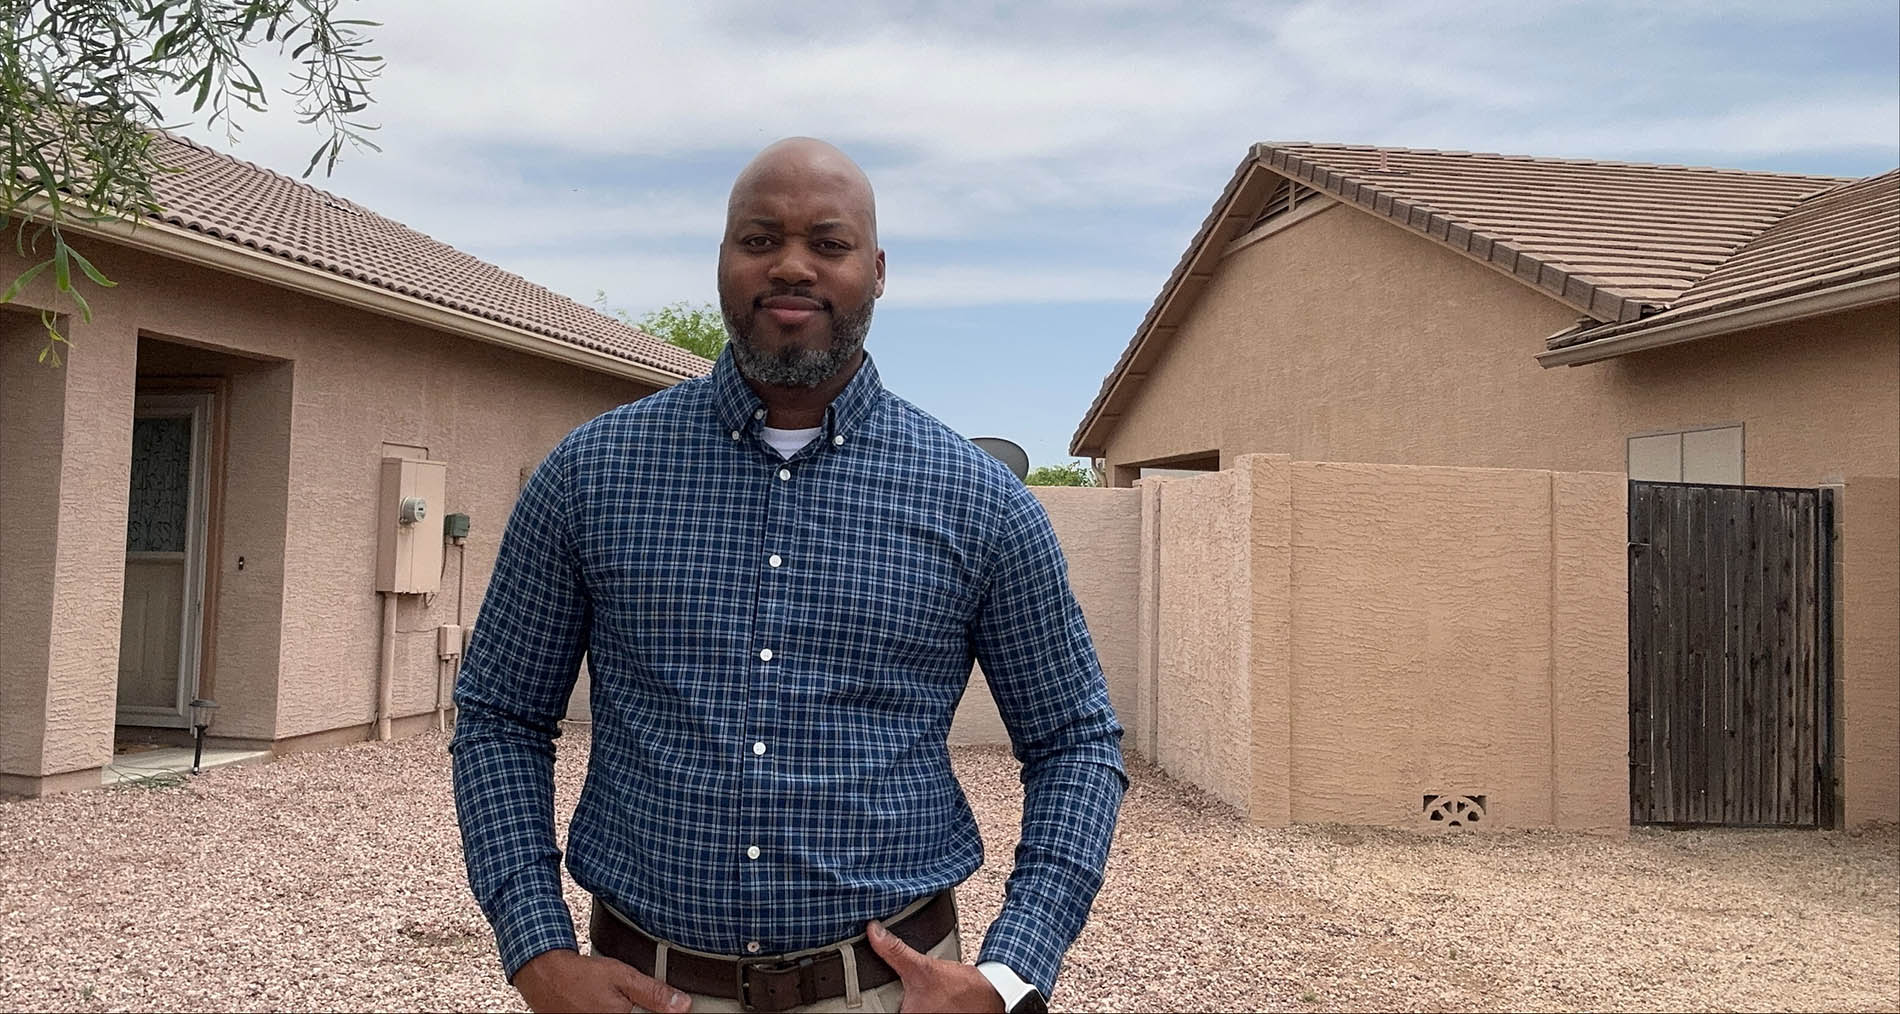 ASU graduate and veteran , who served 14 years in the U.S. Marines Corps, will be pursuing his second career in project management.